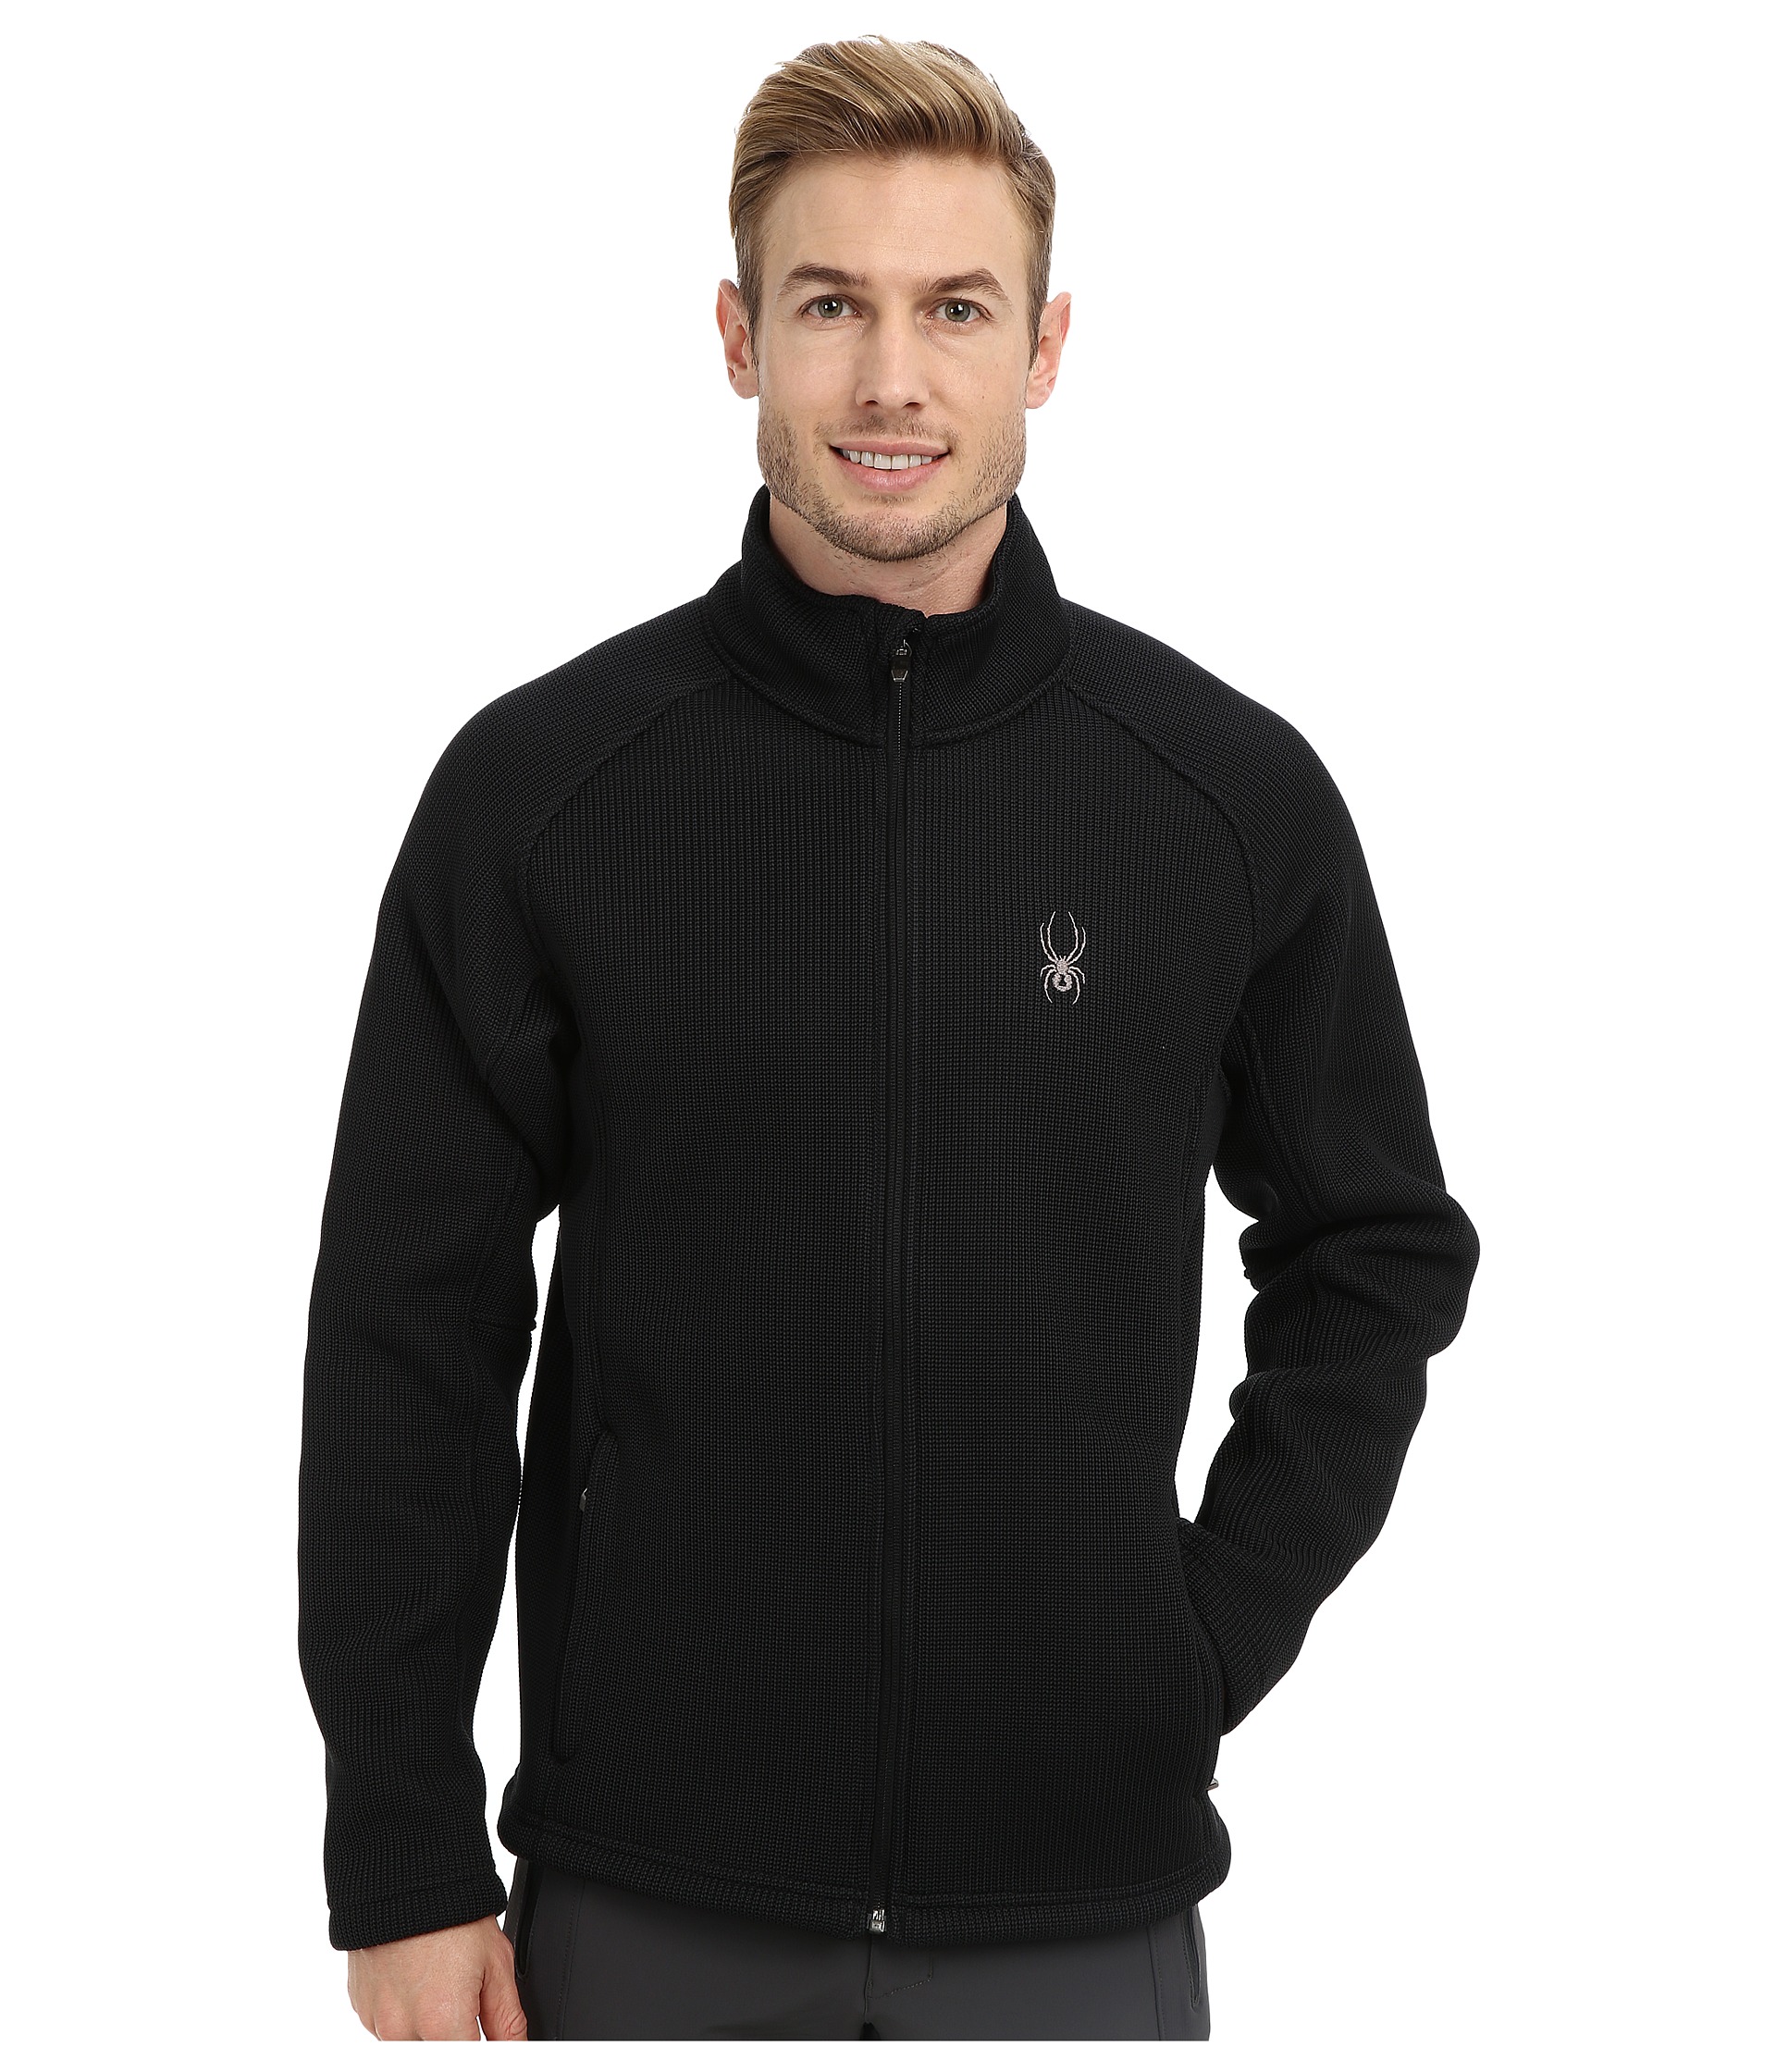 Spyder Foremost Full Zip Heavy Weight Core Sweater Jacket | Shipped ...